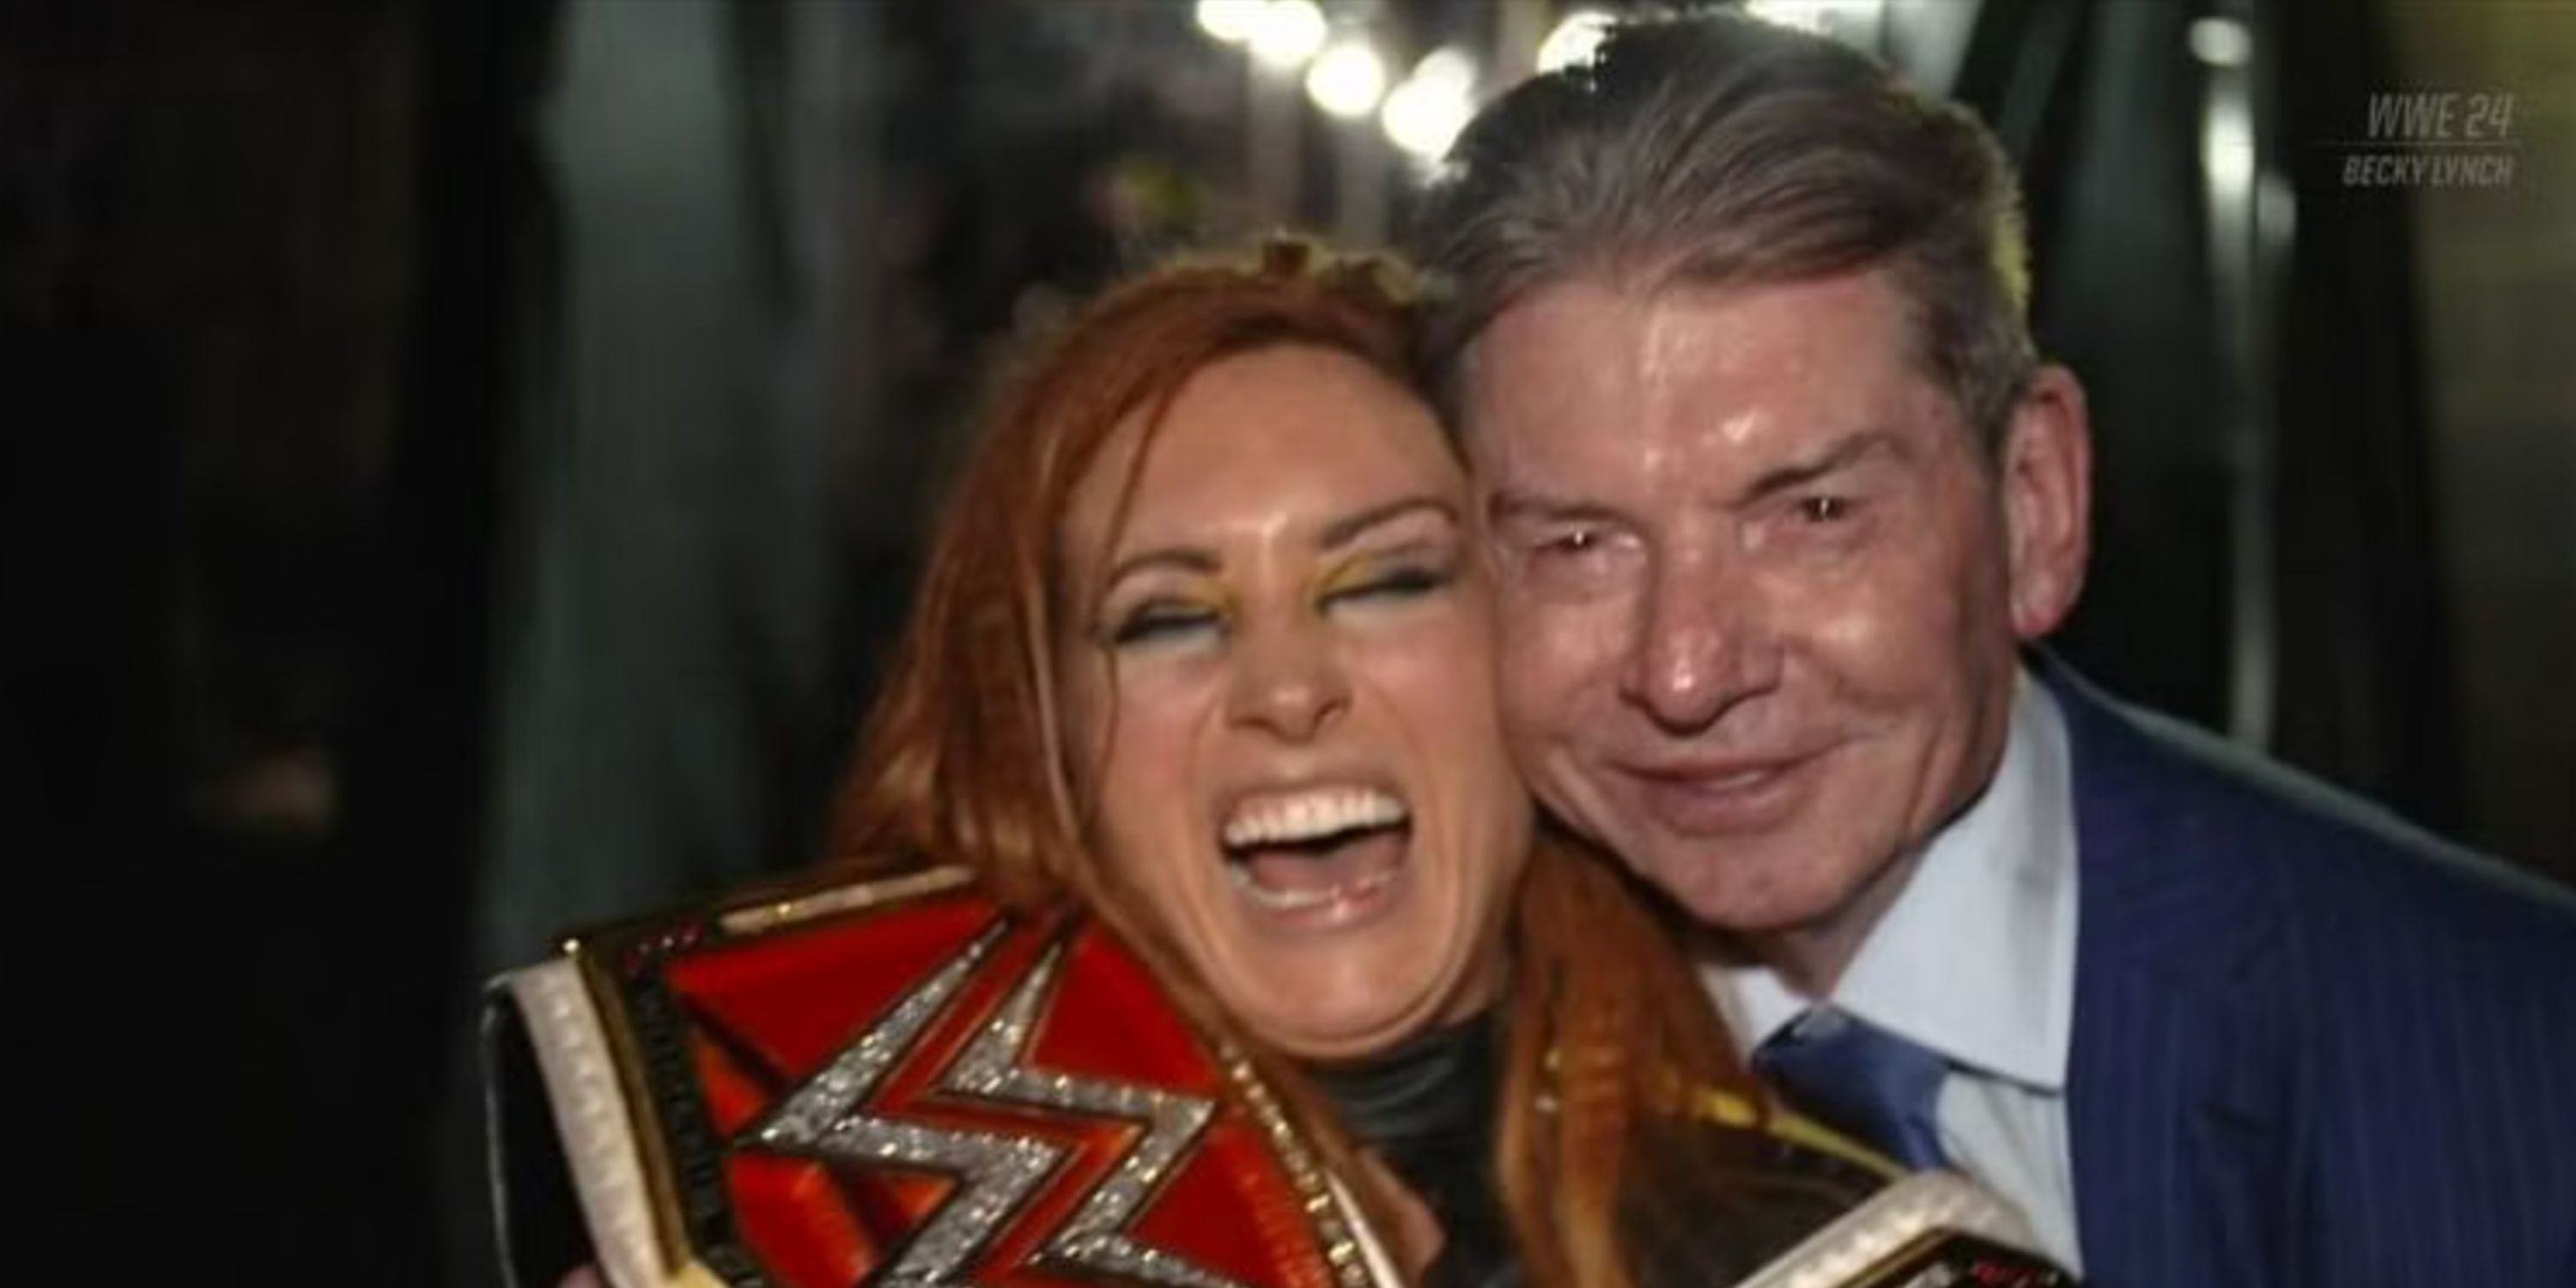 Becky Lynch & Vince McMahon